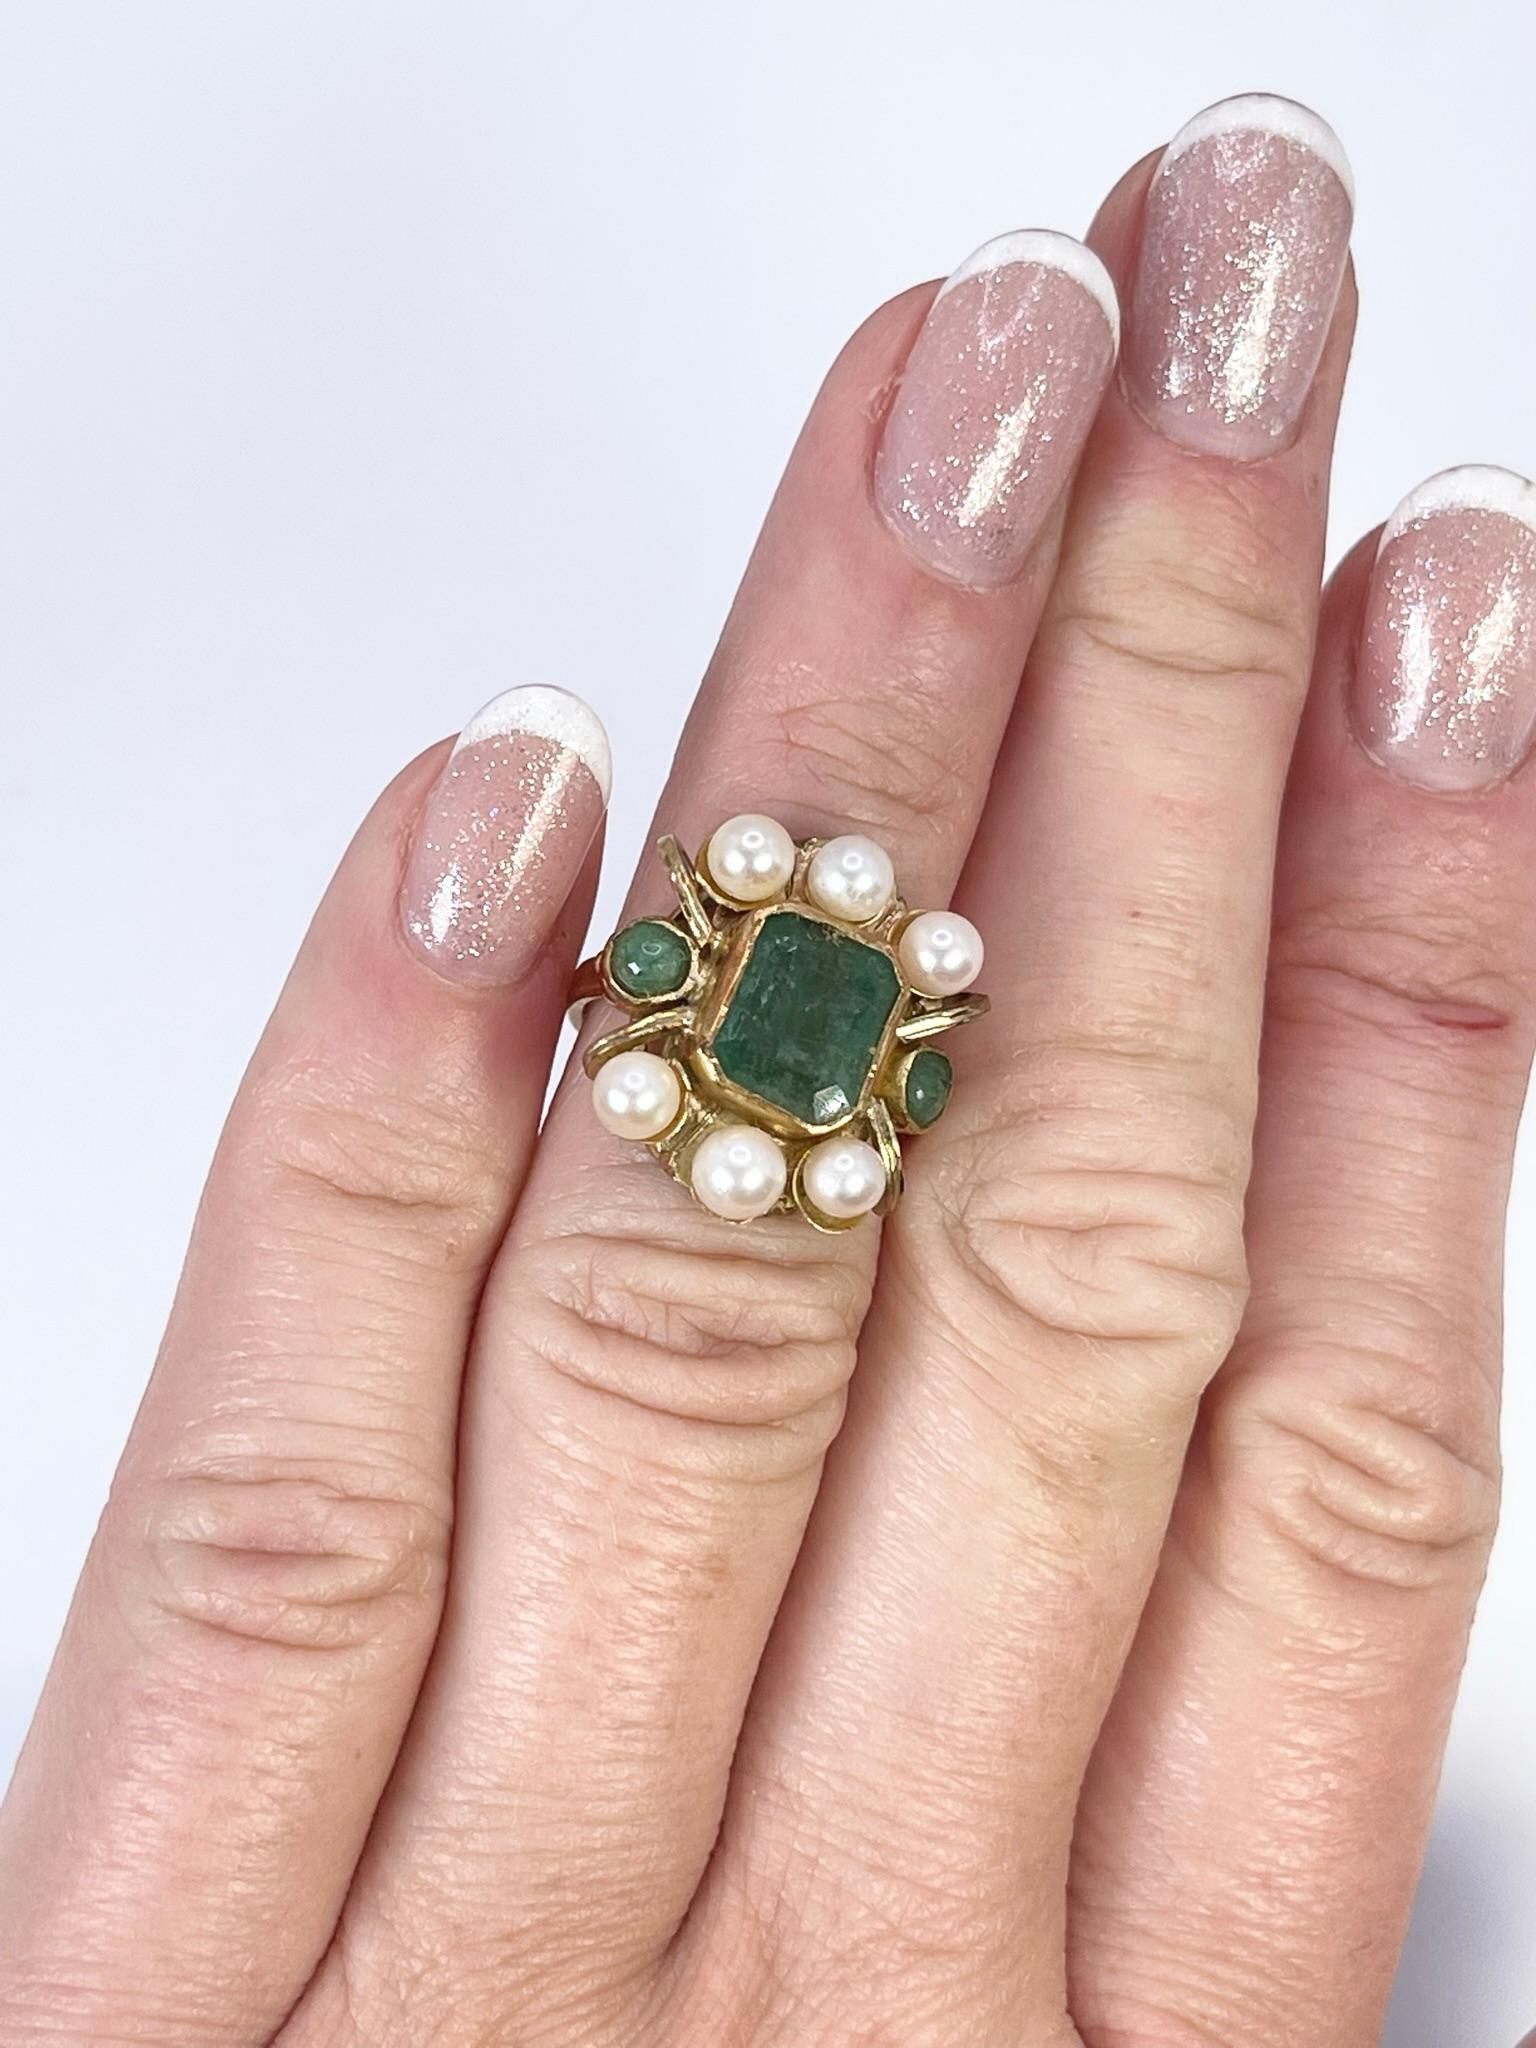 Art Nouveau Emerald & Pearl Cocktail Ring Handmade Old Age Unknown 14KT Yellow Gold For Sale